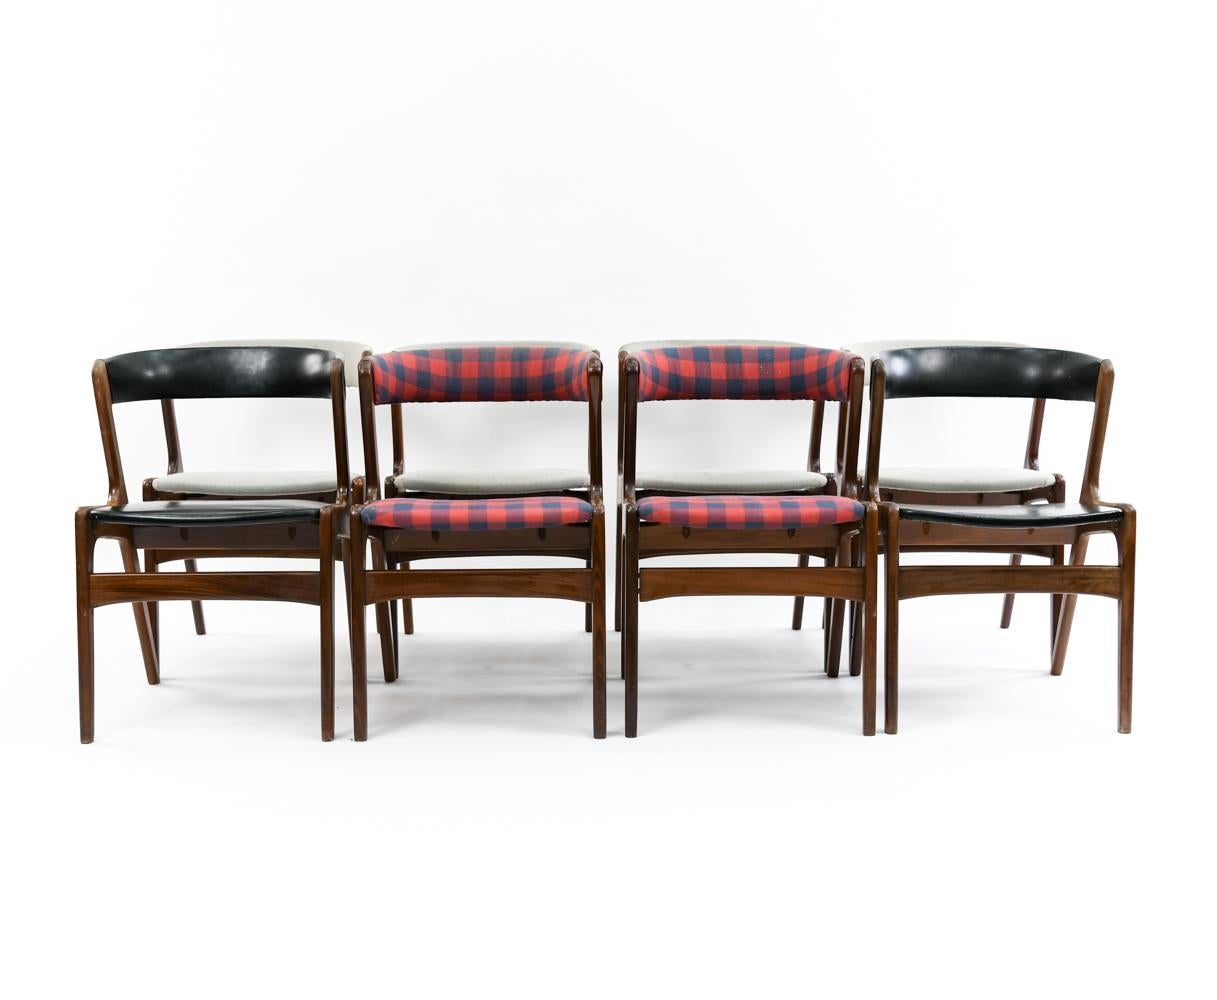 A set of eight Danish midcentury dining chairs designed by the iconic Kai Kristiansen. Featuring curved backrests and a 